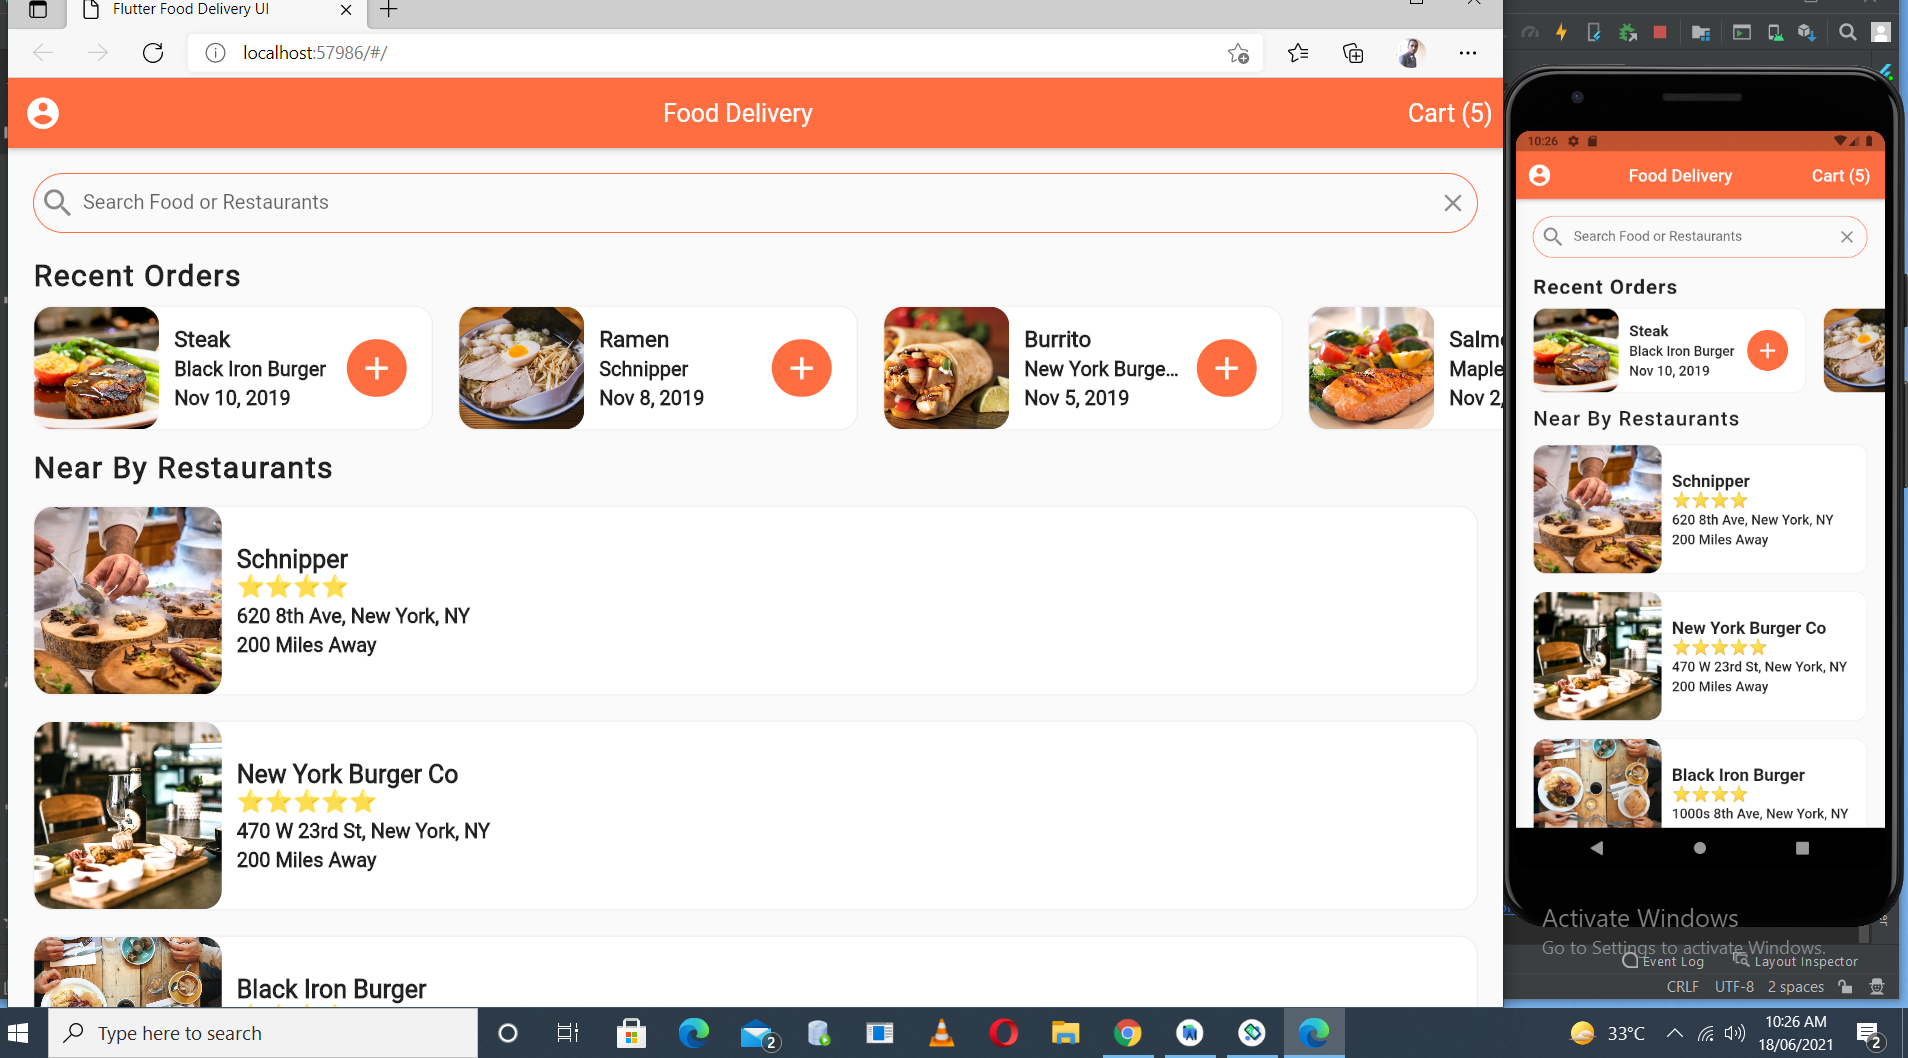 Food Delivery UI by Aqib Flutter